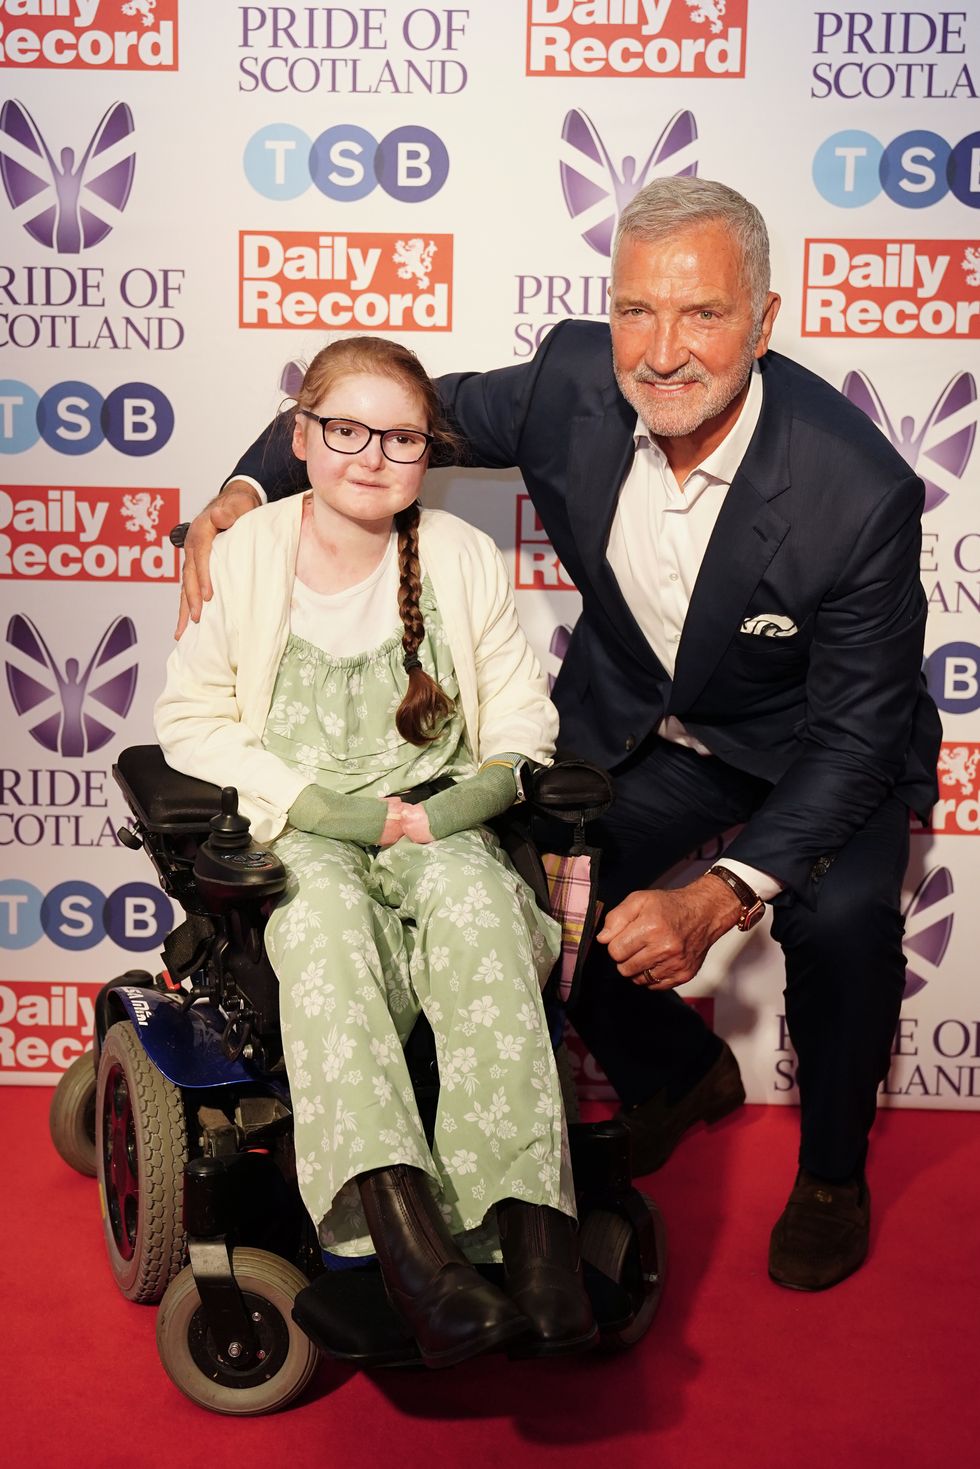 Graeme Souness: Butterfly skin girl is the ‘most special human being’